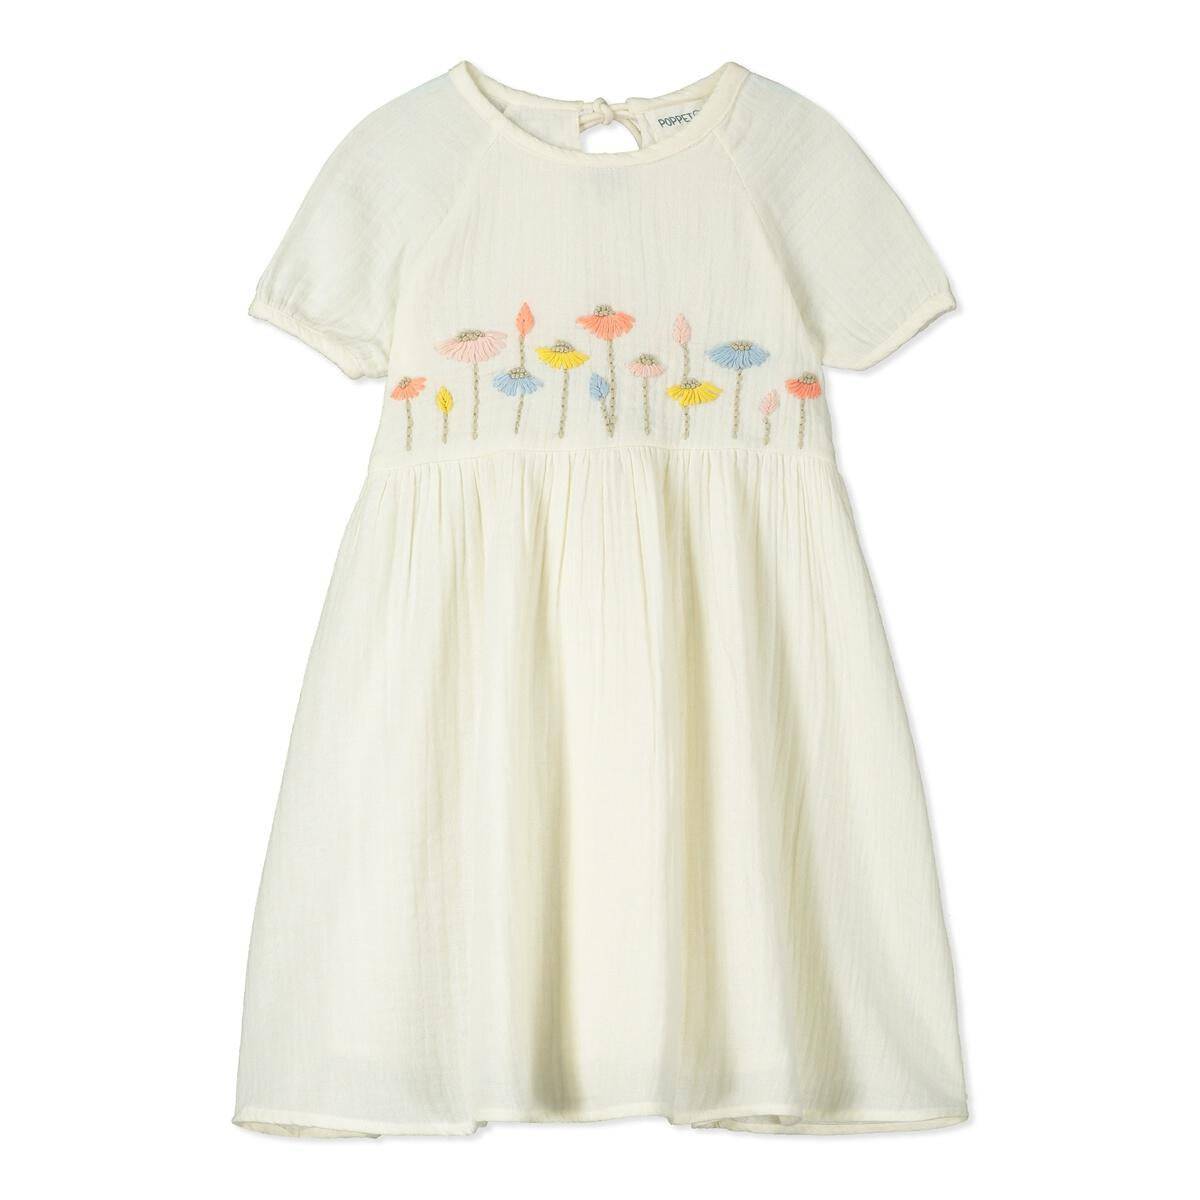 Sedona Hand Embroidered Flower Cotton Dress - Twinkle Twinkle Little One